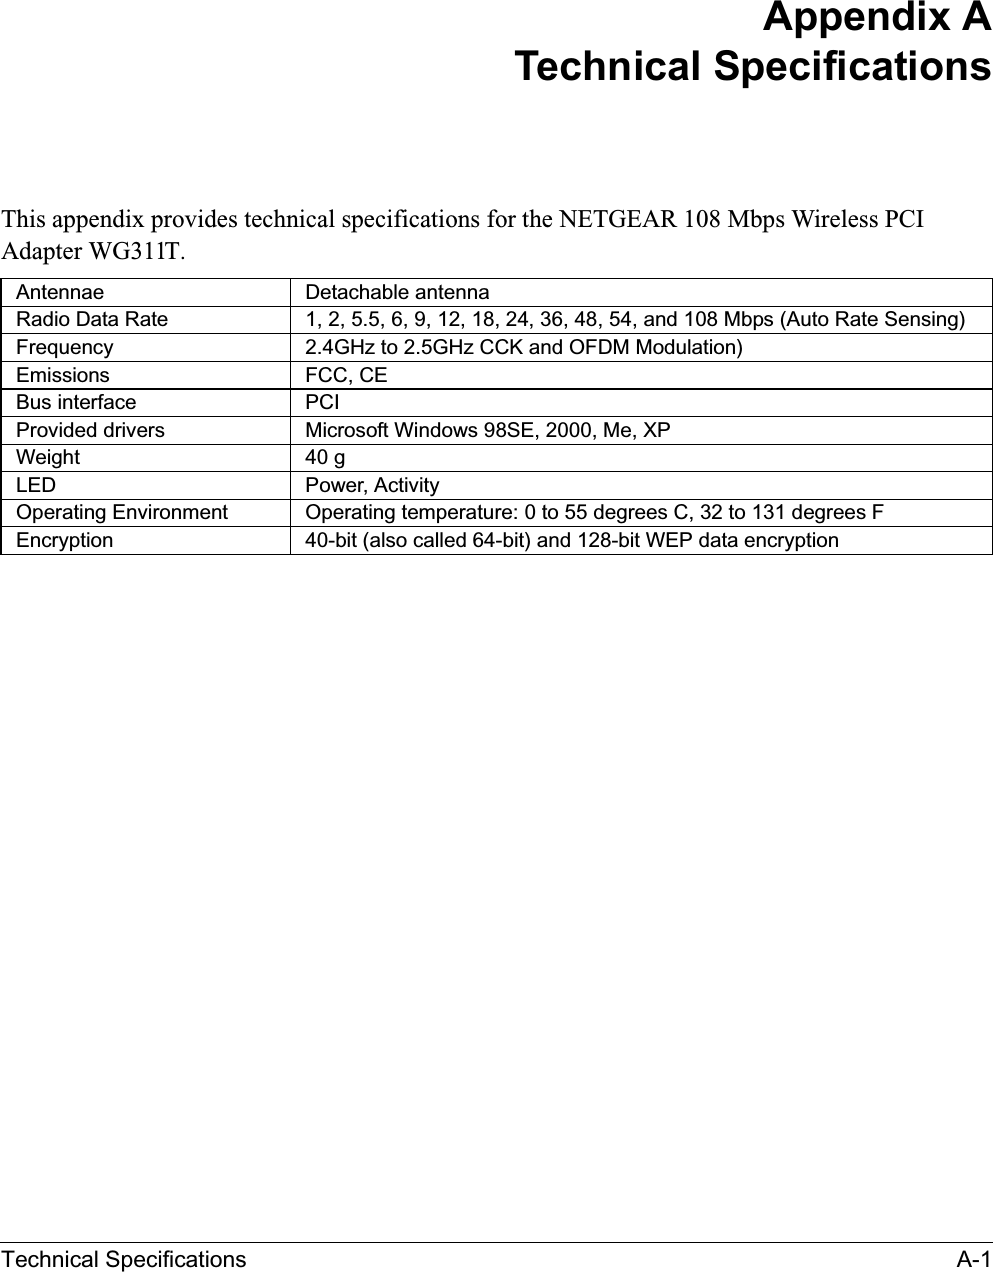 Technical Specifications A-1Appendix ATechnical SpecificationsThis appendix provides technical specifications for the NETGEAR 108 Mbps Wireless PCI Adapter WG311T.Antennae Detachable antenna Radio Data Rate 1, 2, 5.5, 6, 9, 12, 18, 24, 36, 48, 54, and 108 Mbps (Auto Rate Sensing)Frequency 2.4GHz to 2.5GHz CCK and OFDM Modulation)Emissions FCC, CEBus interface PCIProvided drivers Microsoft Windows 98SE, 2000, Me, XPWeight 40 g LED Power, ActivityOperating Environment  Operating temperature: 0 to 55 degrees C, 32 to 131 degrees FEncryption 40-bit (also called 64-bit) and 128-bit WEP data encryption